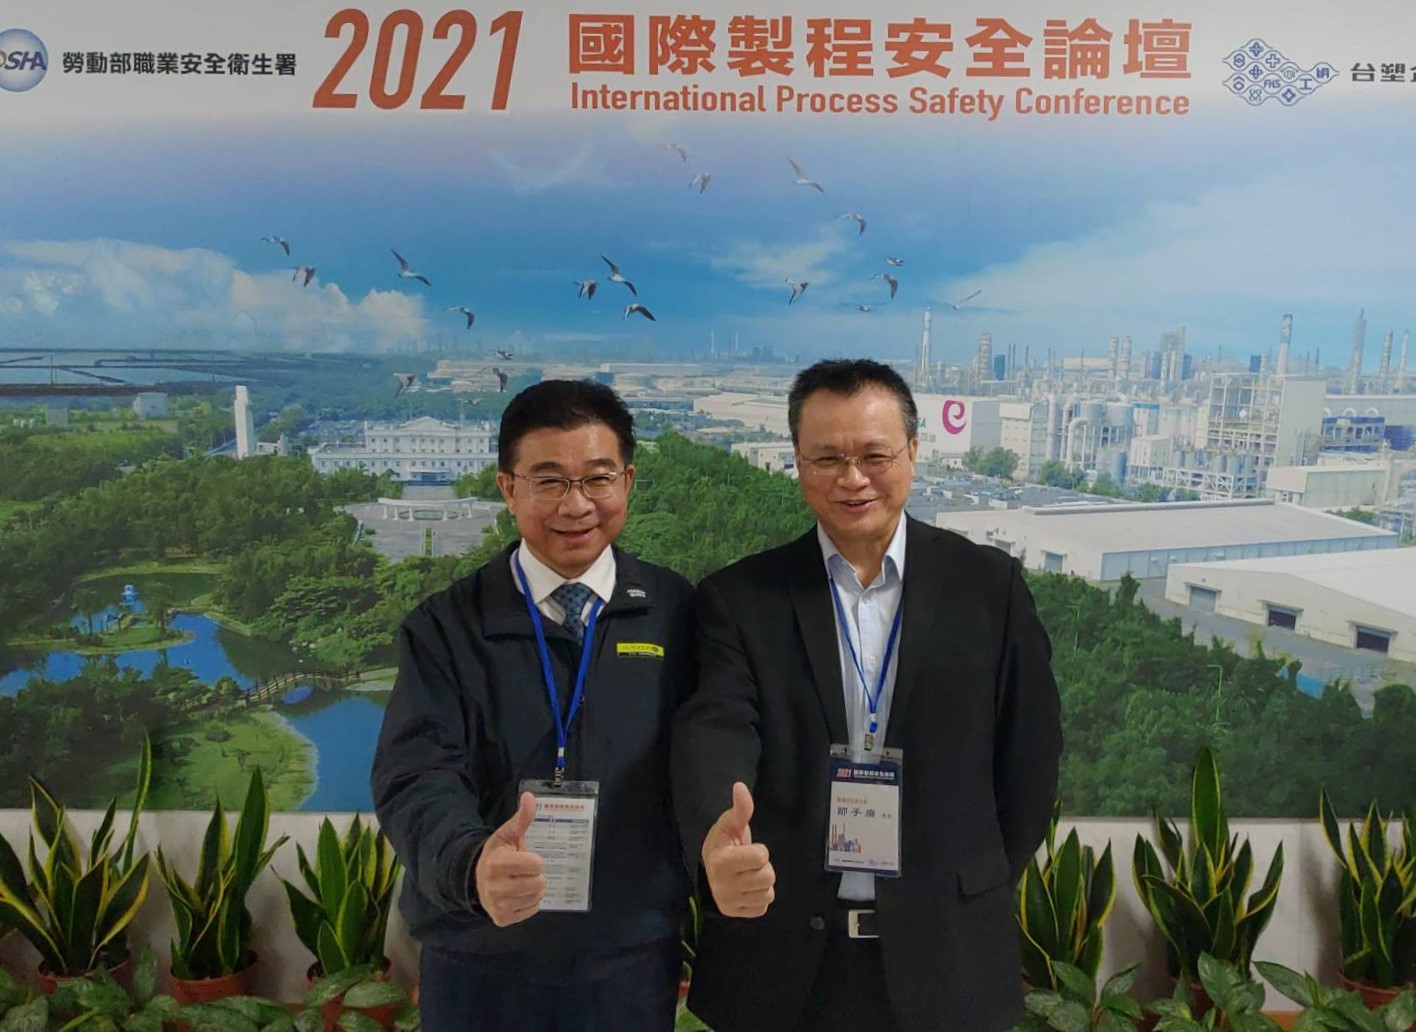 Formosa Plastics Group President Sang-Chih Lin and the Chief of Occupational Safety and Health Administration Tzu-Lien Tzou(2).jpg